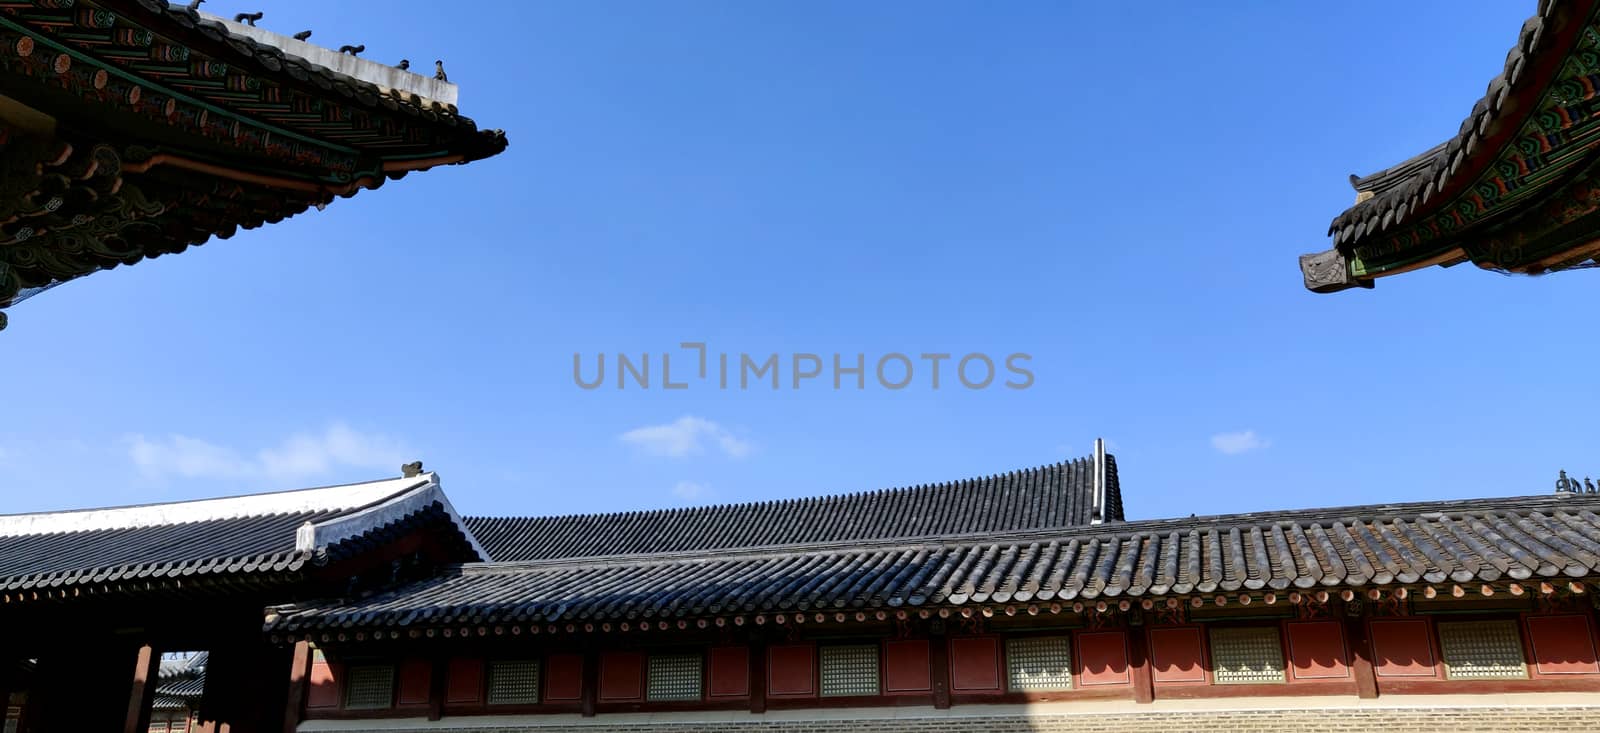 Ancient structure and roof of the traditional houses in Korea by mshivangi92